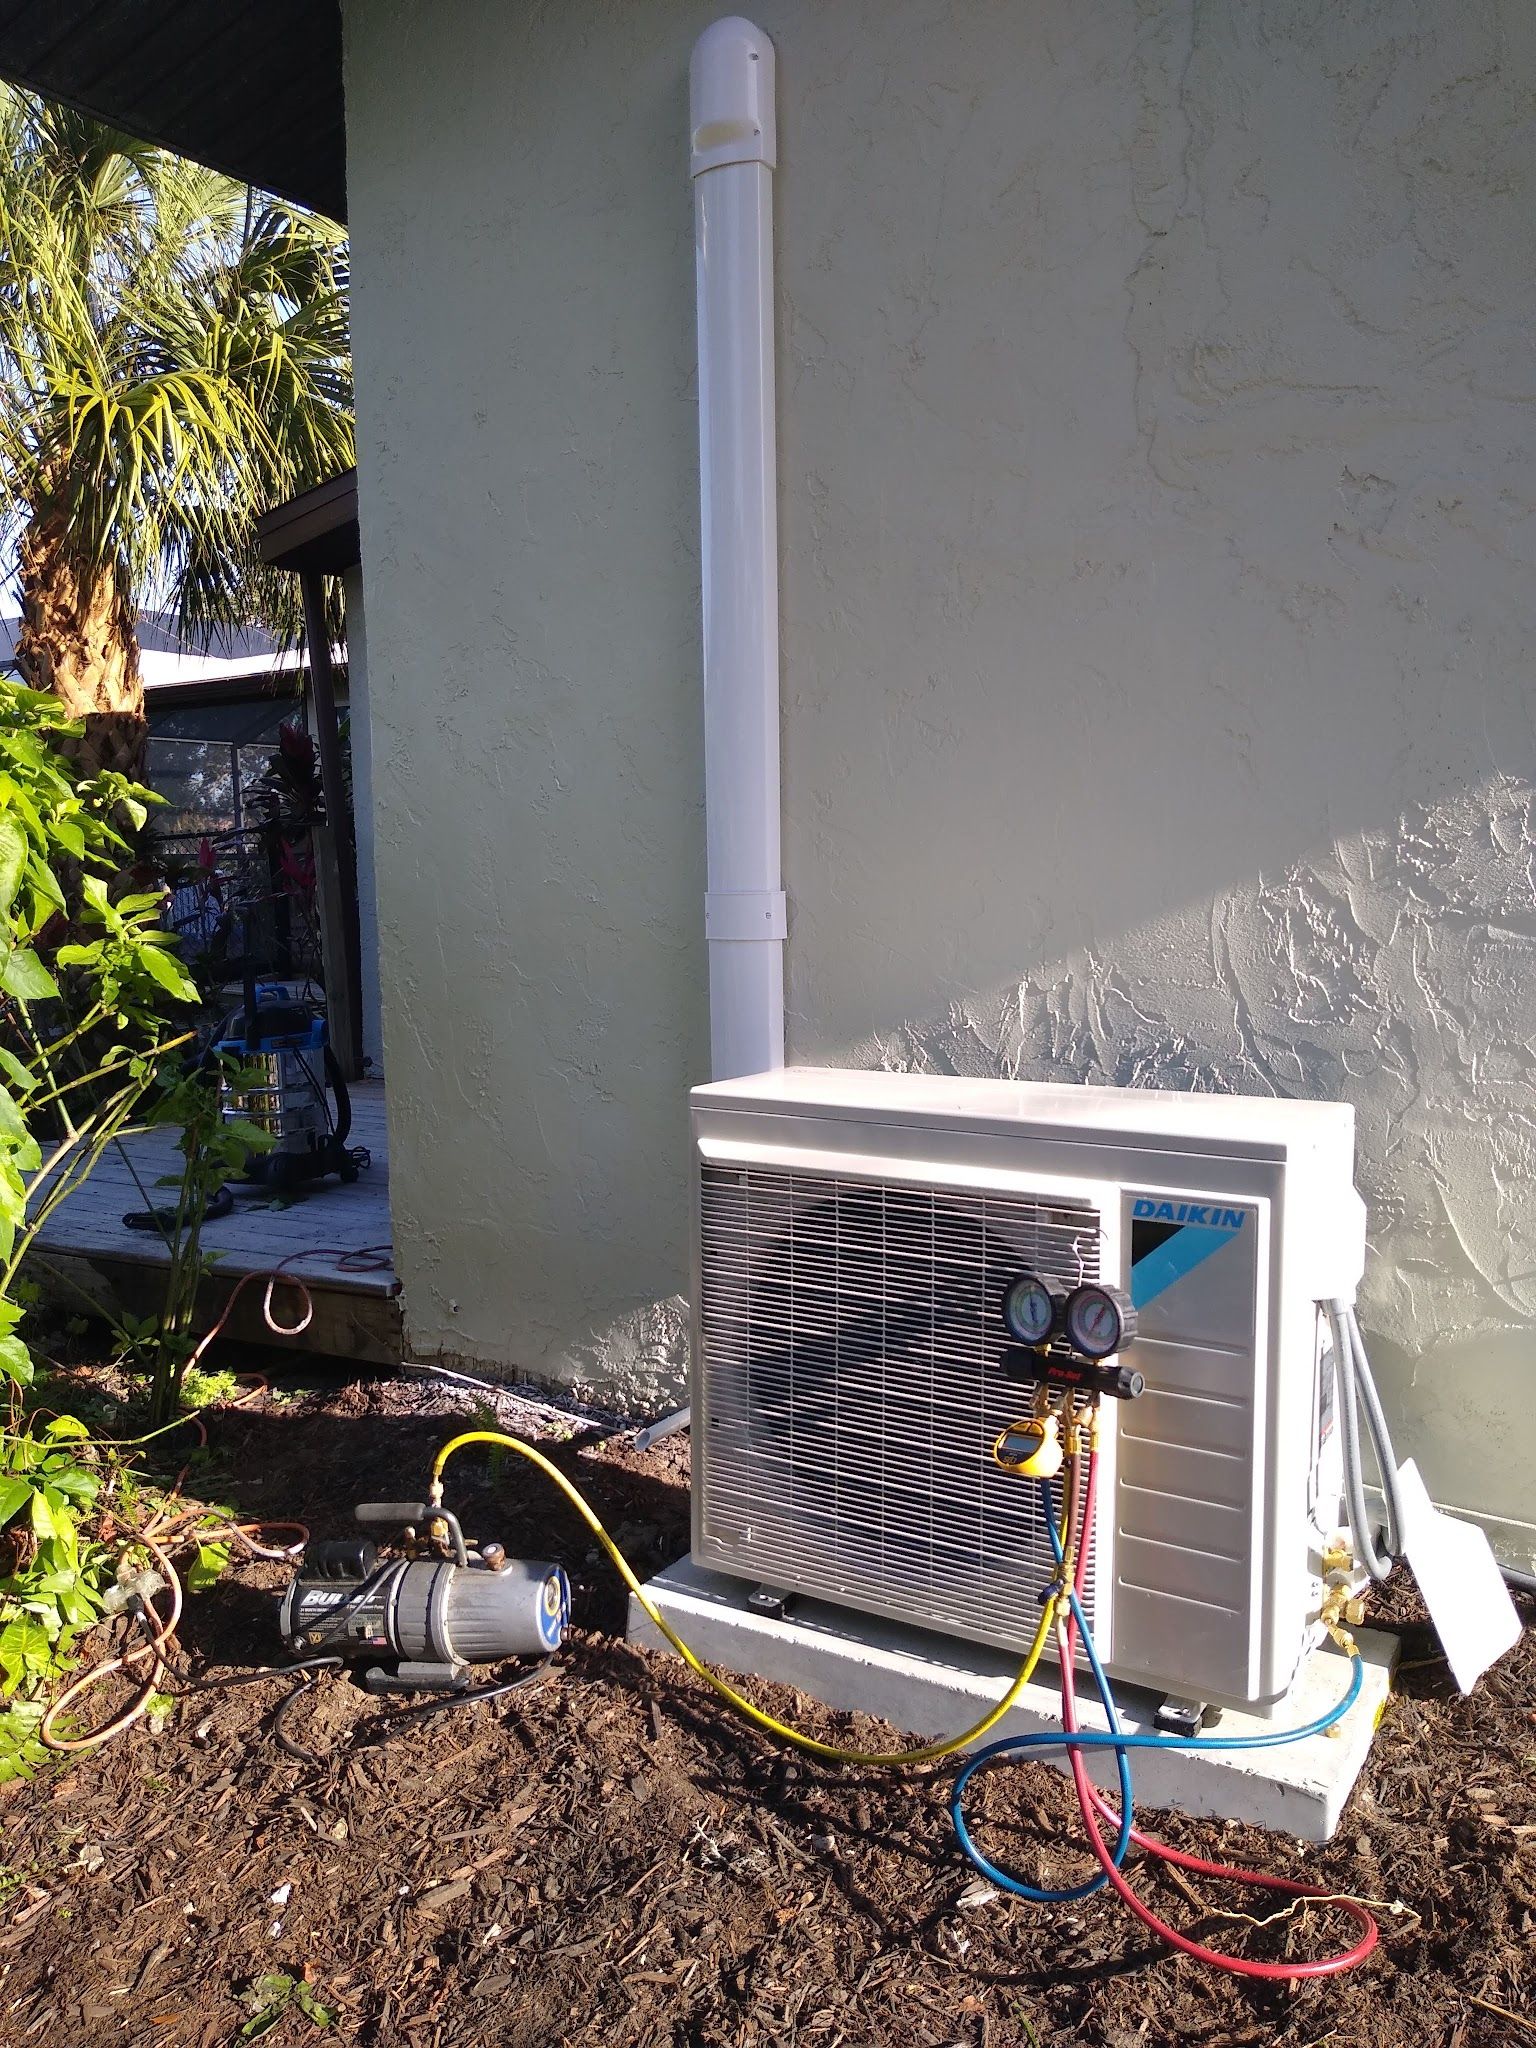 Services & Products Second Home Repairs Inc in Englewood FL